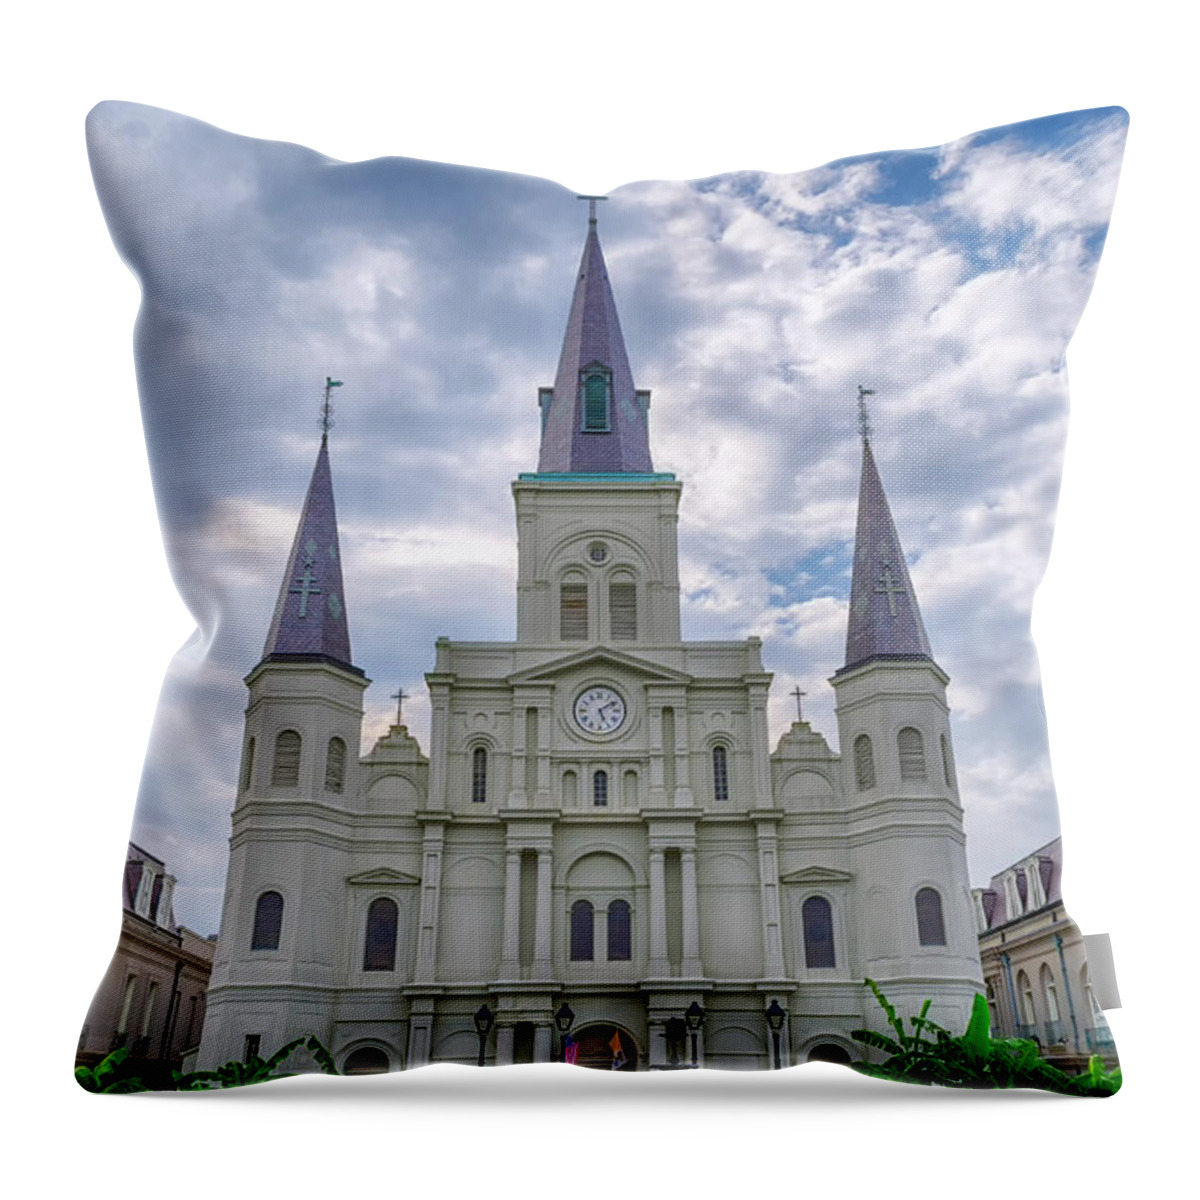 Architecture Throw Pillow featuring the photograph St. Louis Cathedral by Jim Shackett